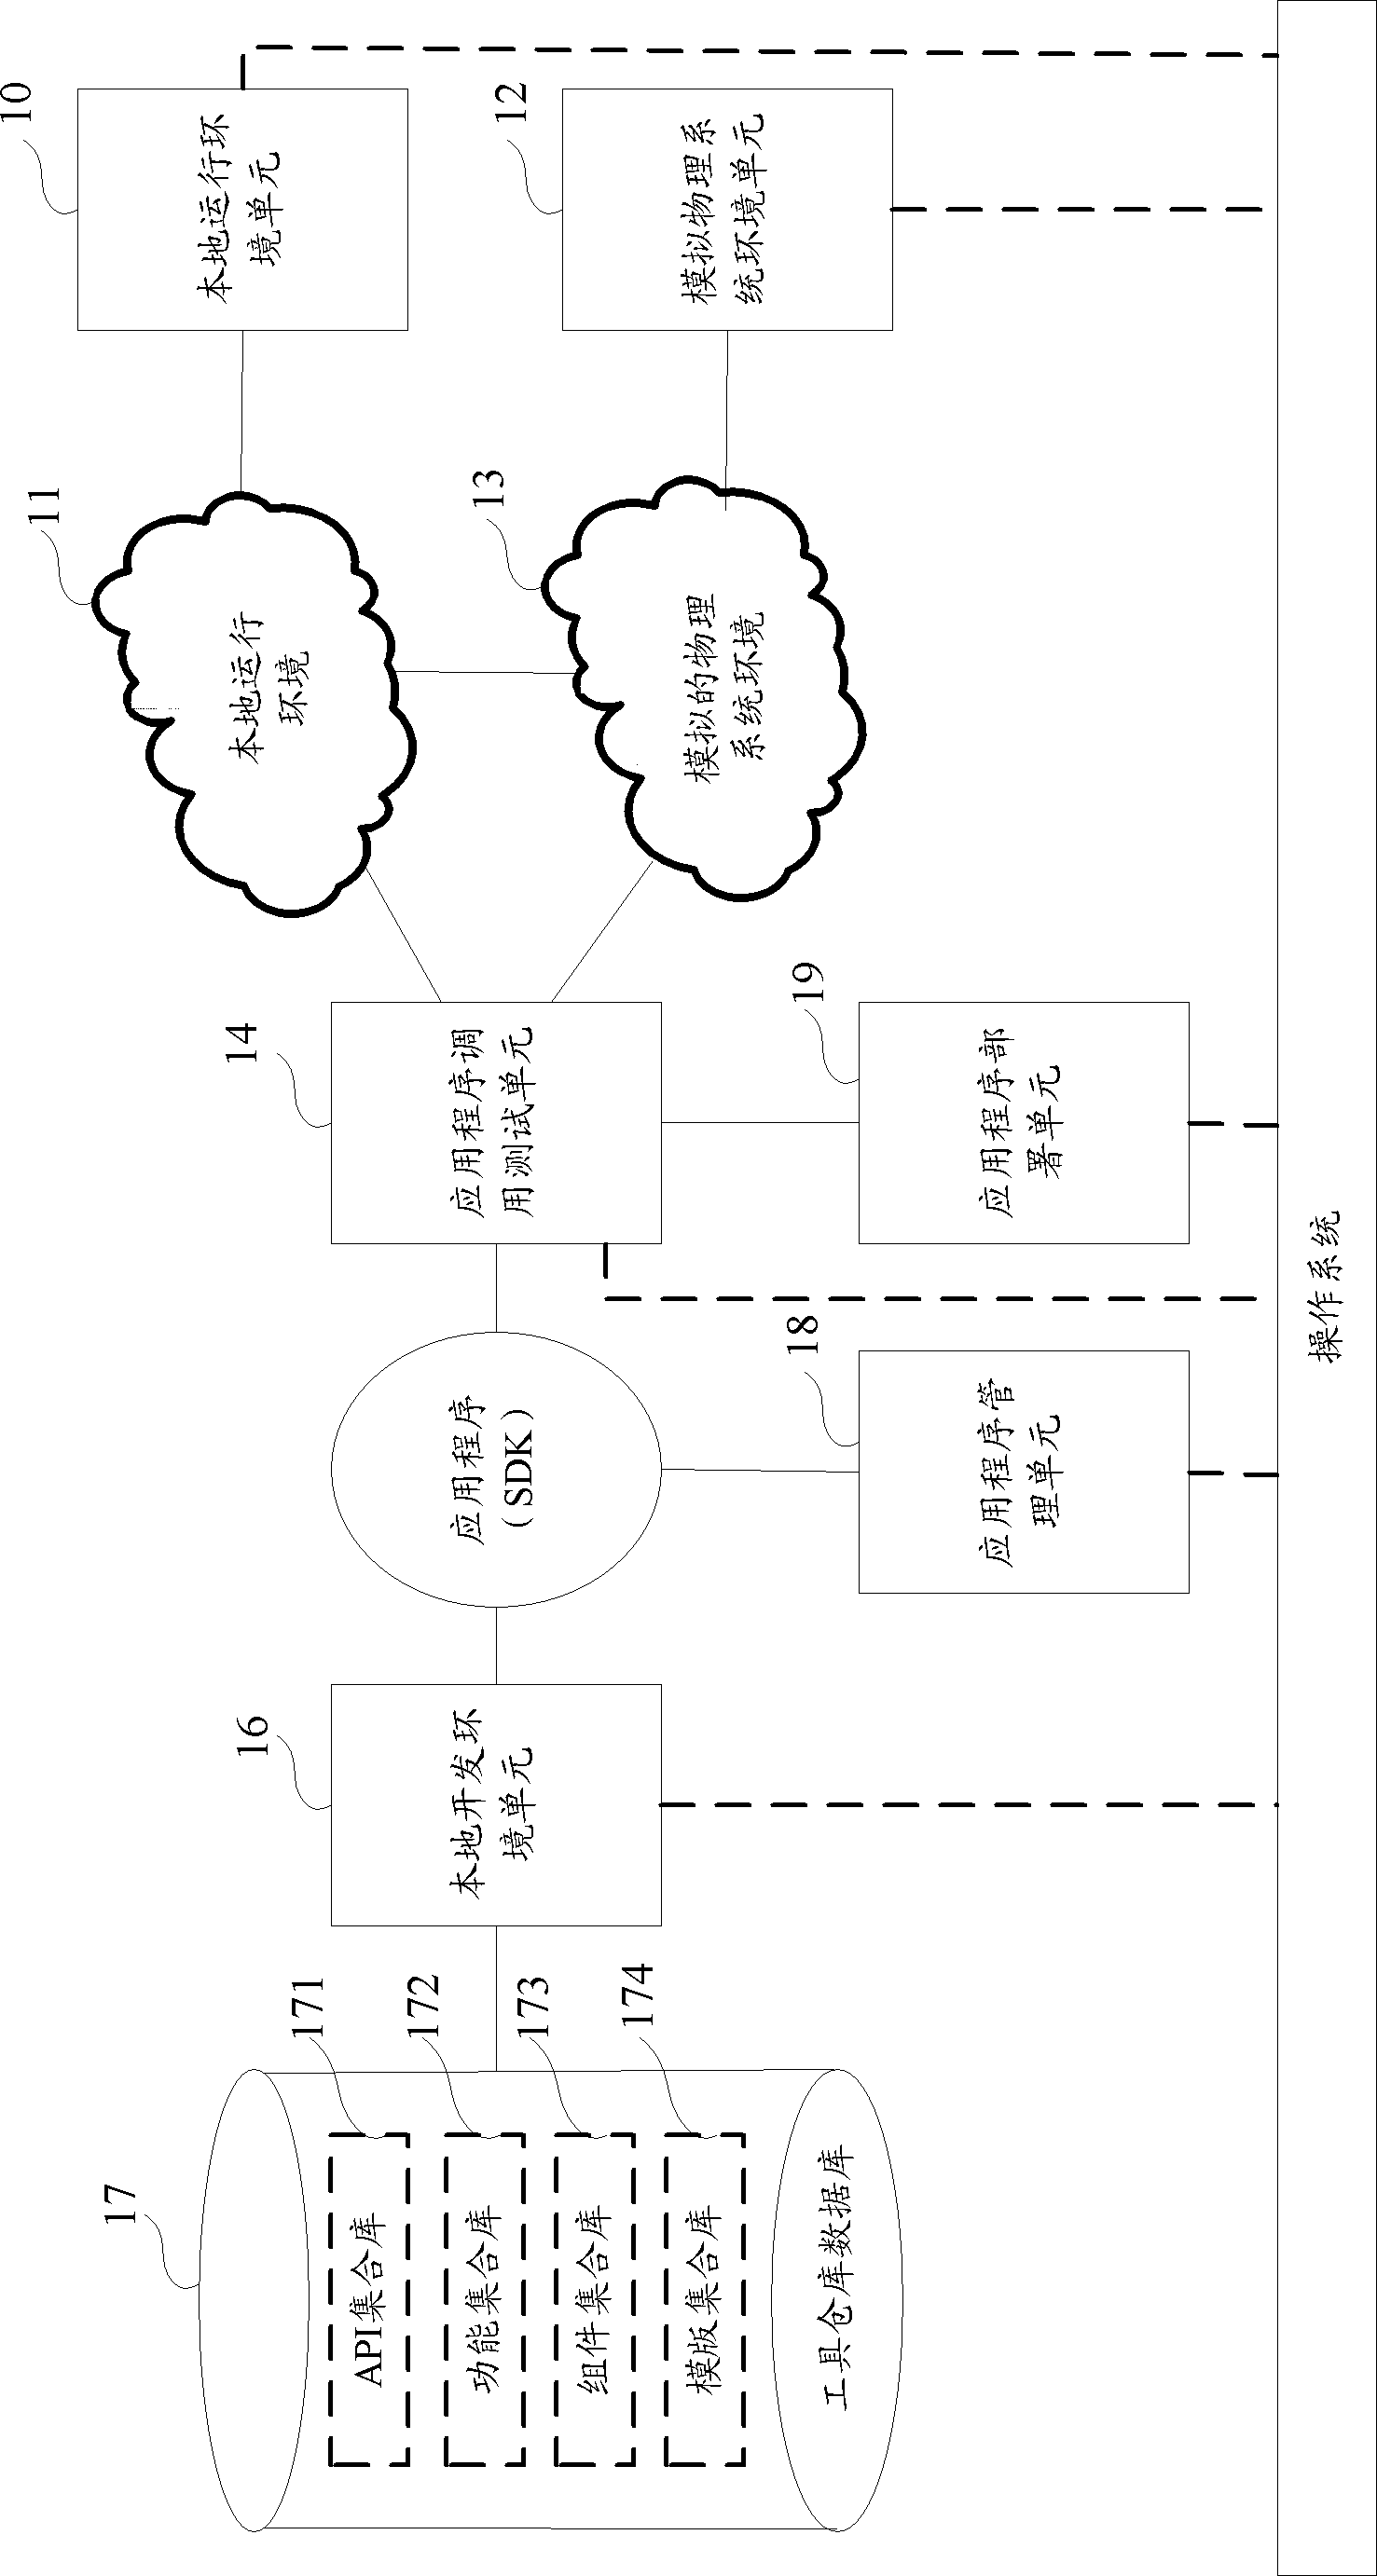 System and method for testing application program in physical system environment